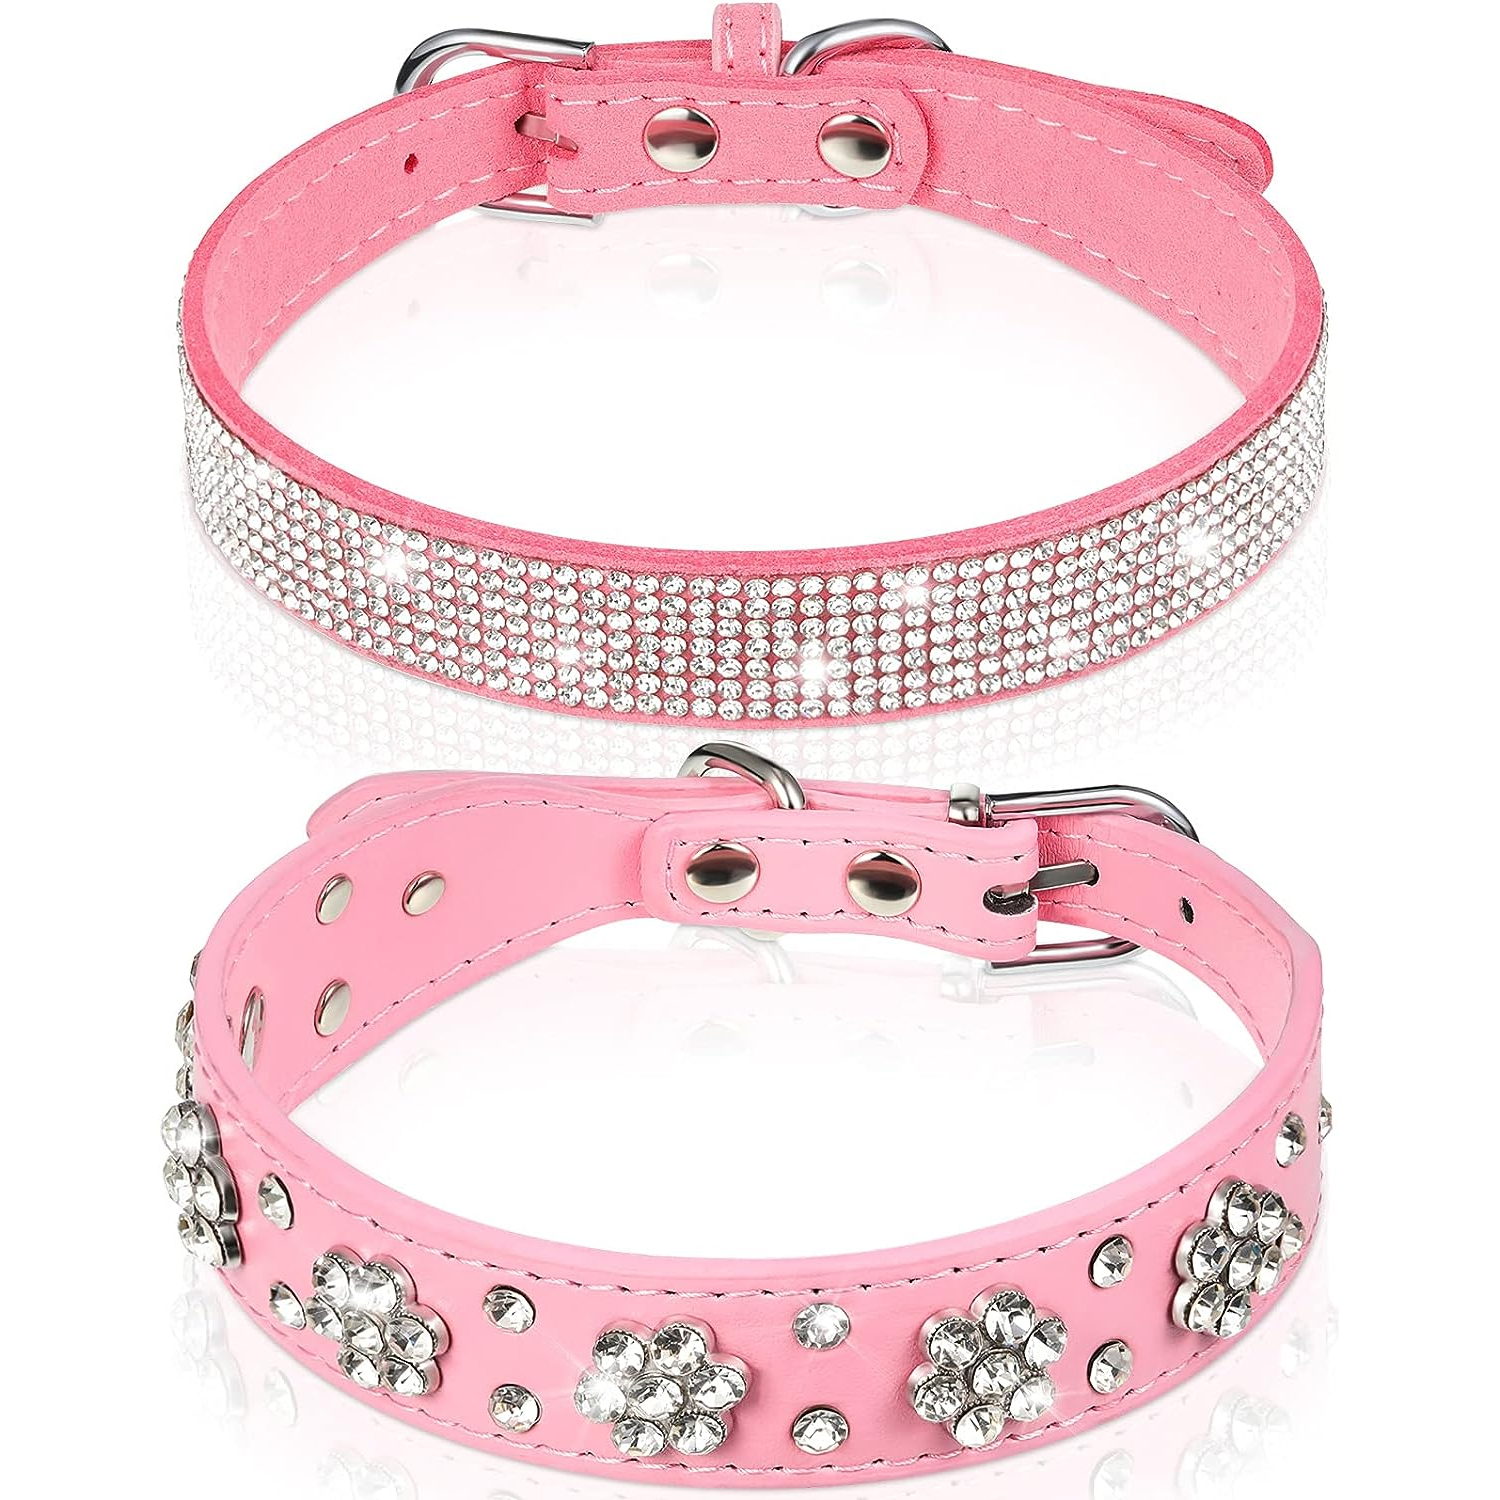 Rhinestone Dog Collar, Bling Diamond Pet Collars with Leash Adjustable,  Dazzling Sparkly Crystal Studded Microfiber Leather Spiked Puppy Collar  Cute